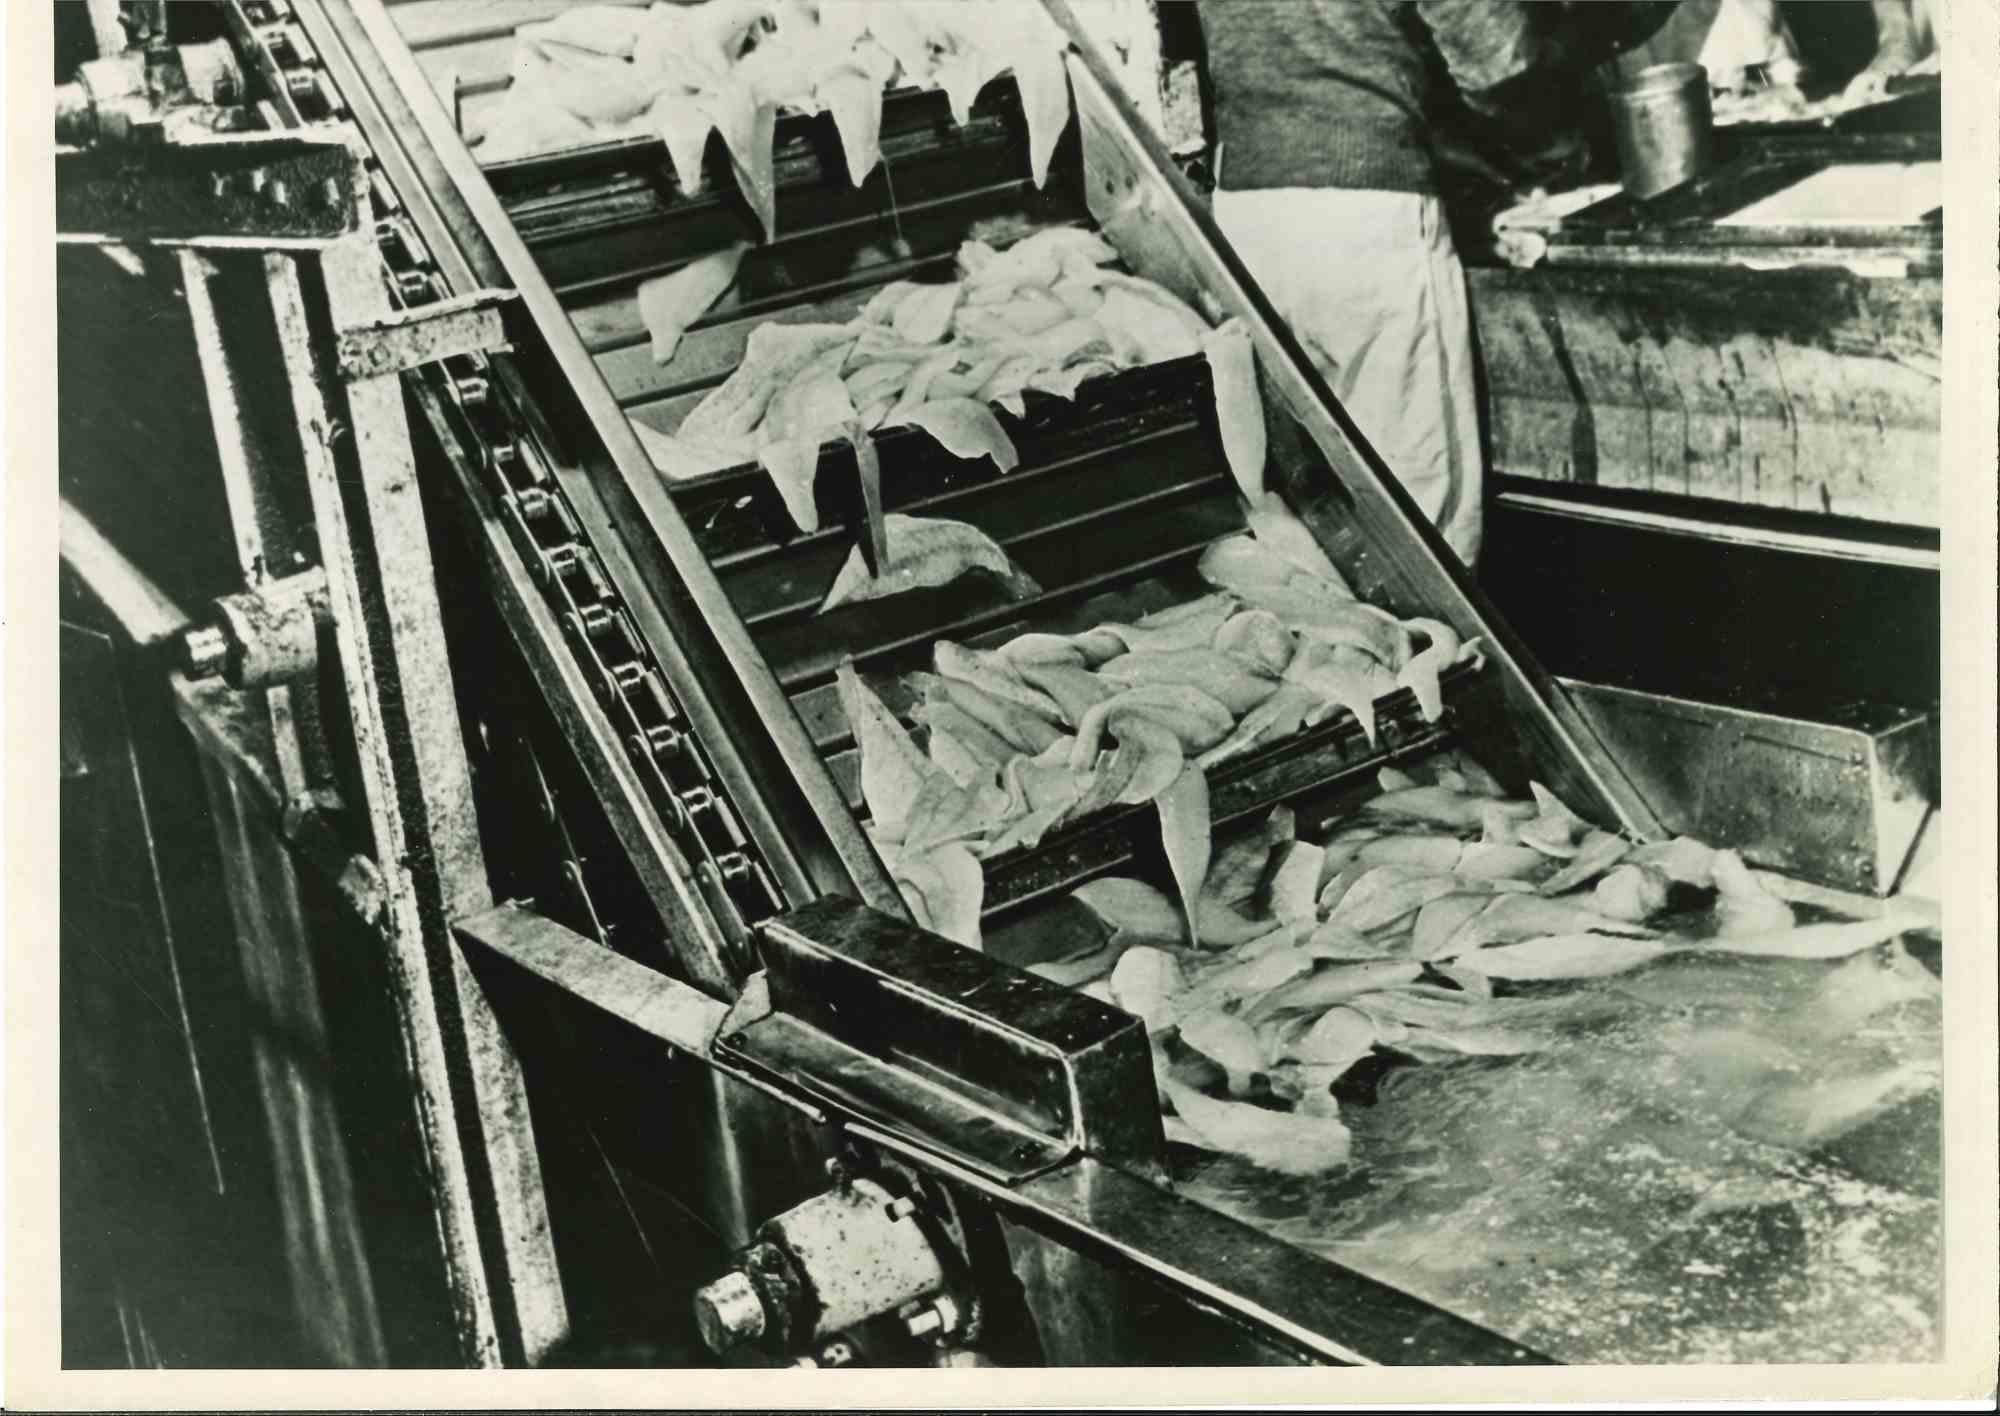 Unknown Figurative Photograph - Frozen Food Industry -  American Vintage Photograph - Mid 20th Century